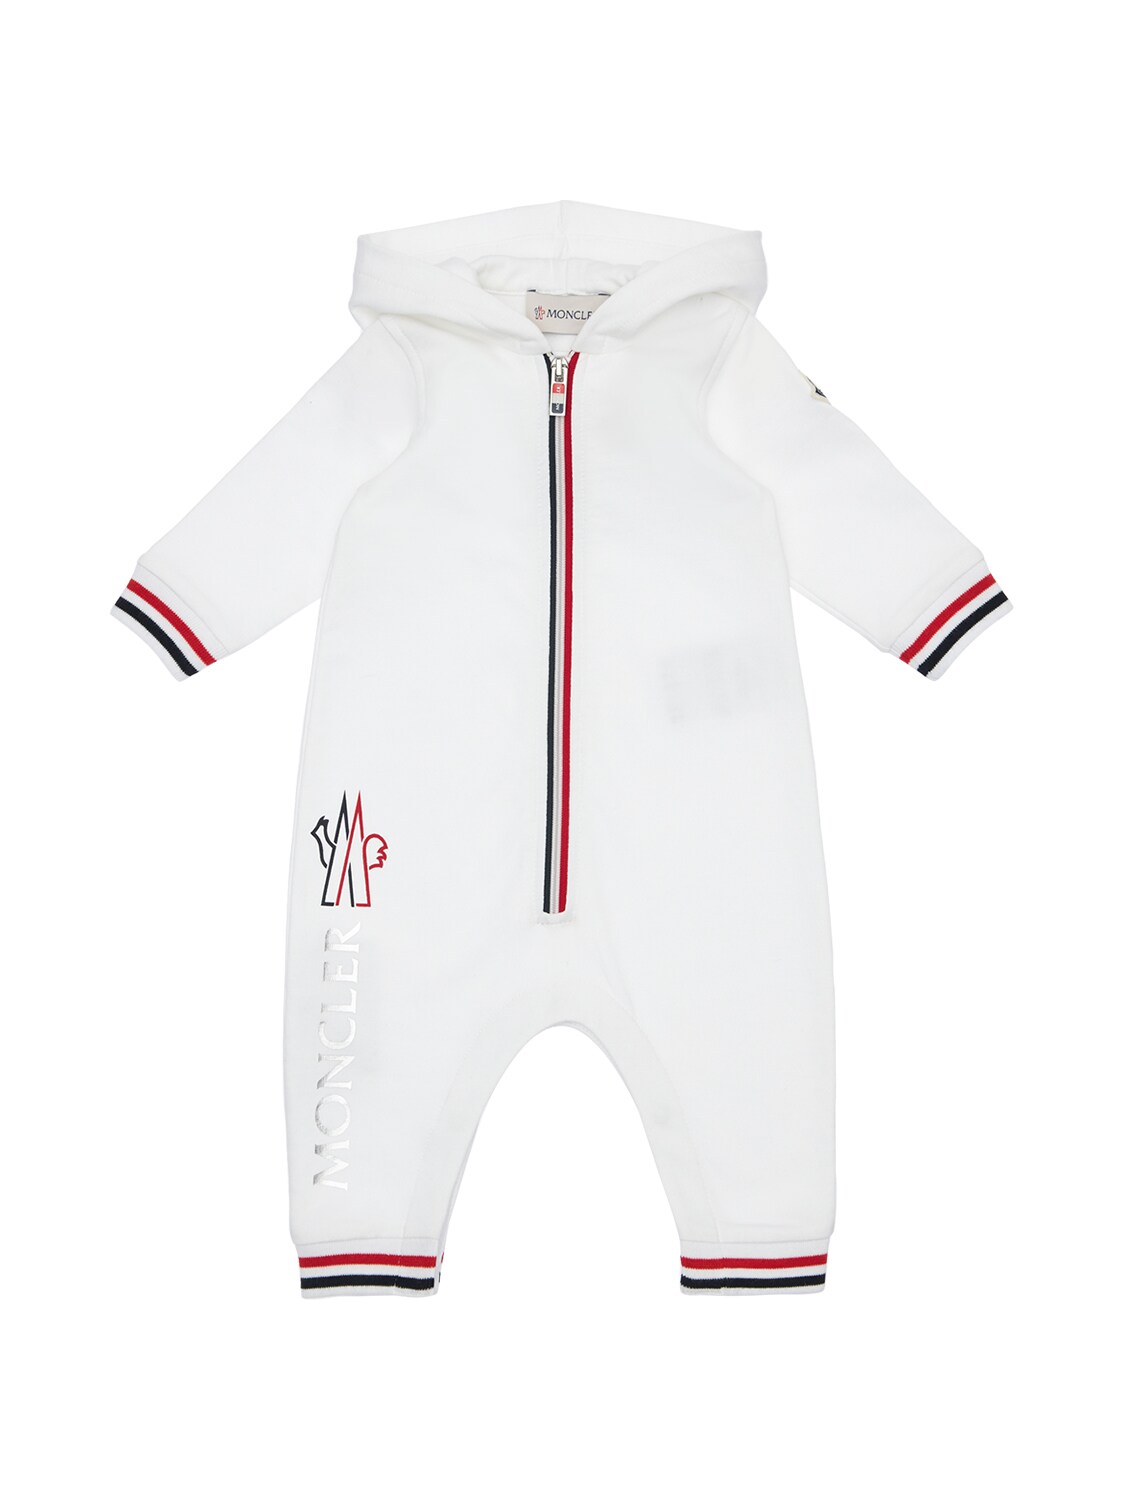 MONCLER HOODED COTTON ROMPER,73IFGR026-MDAY0